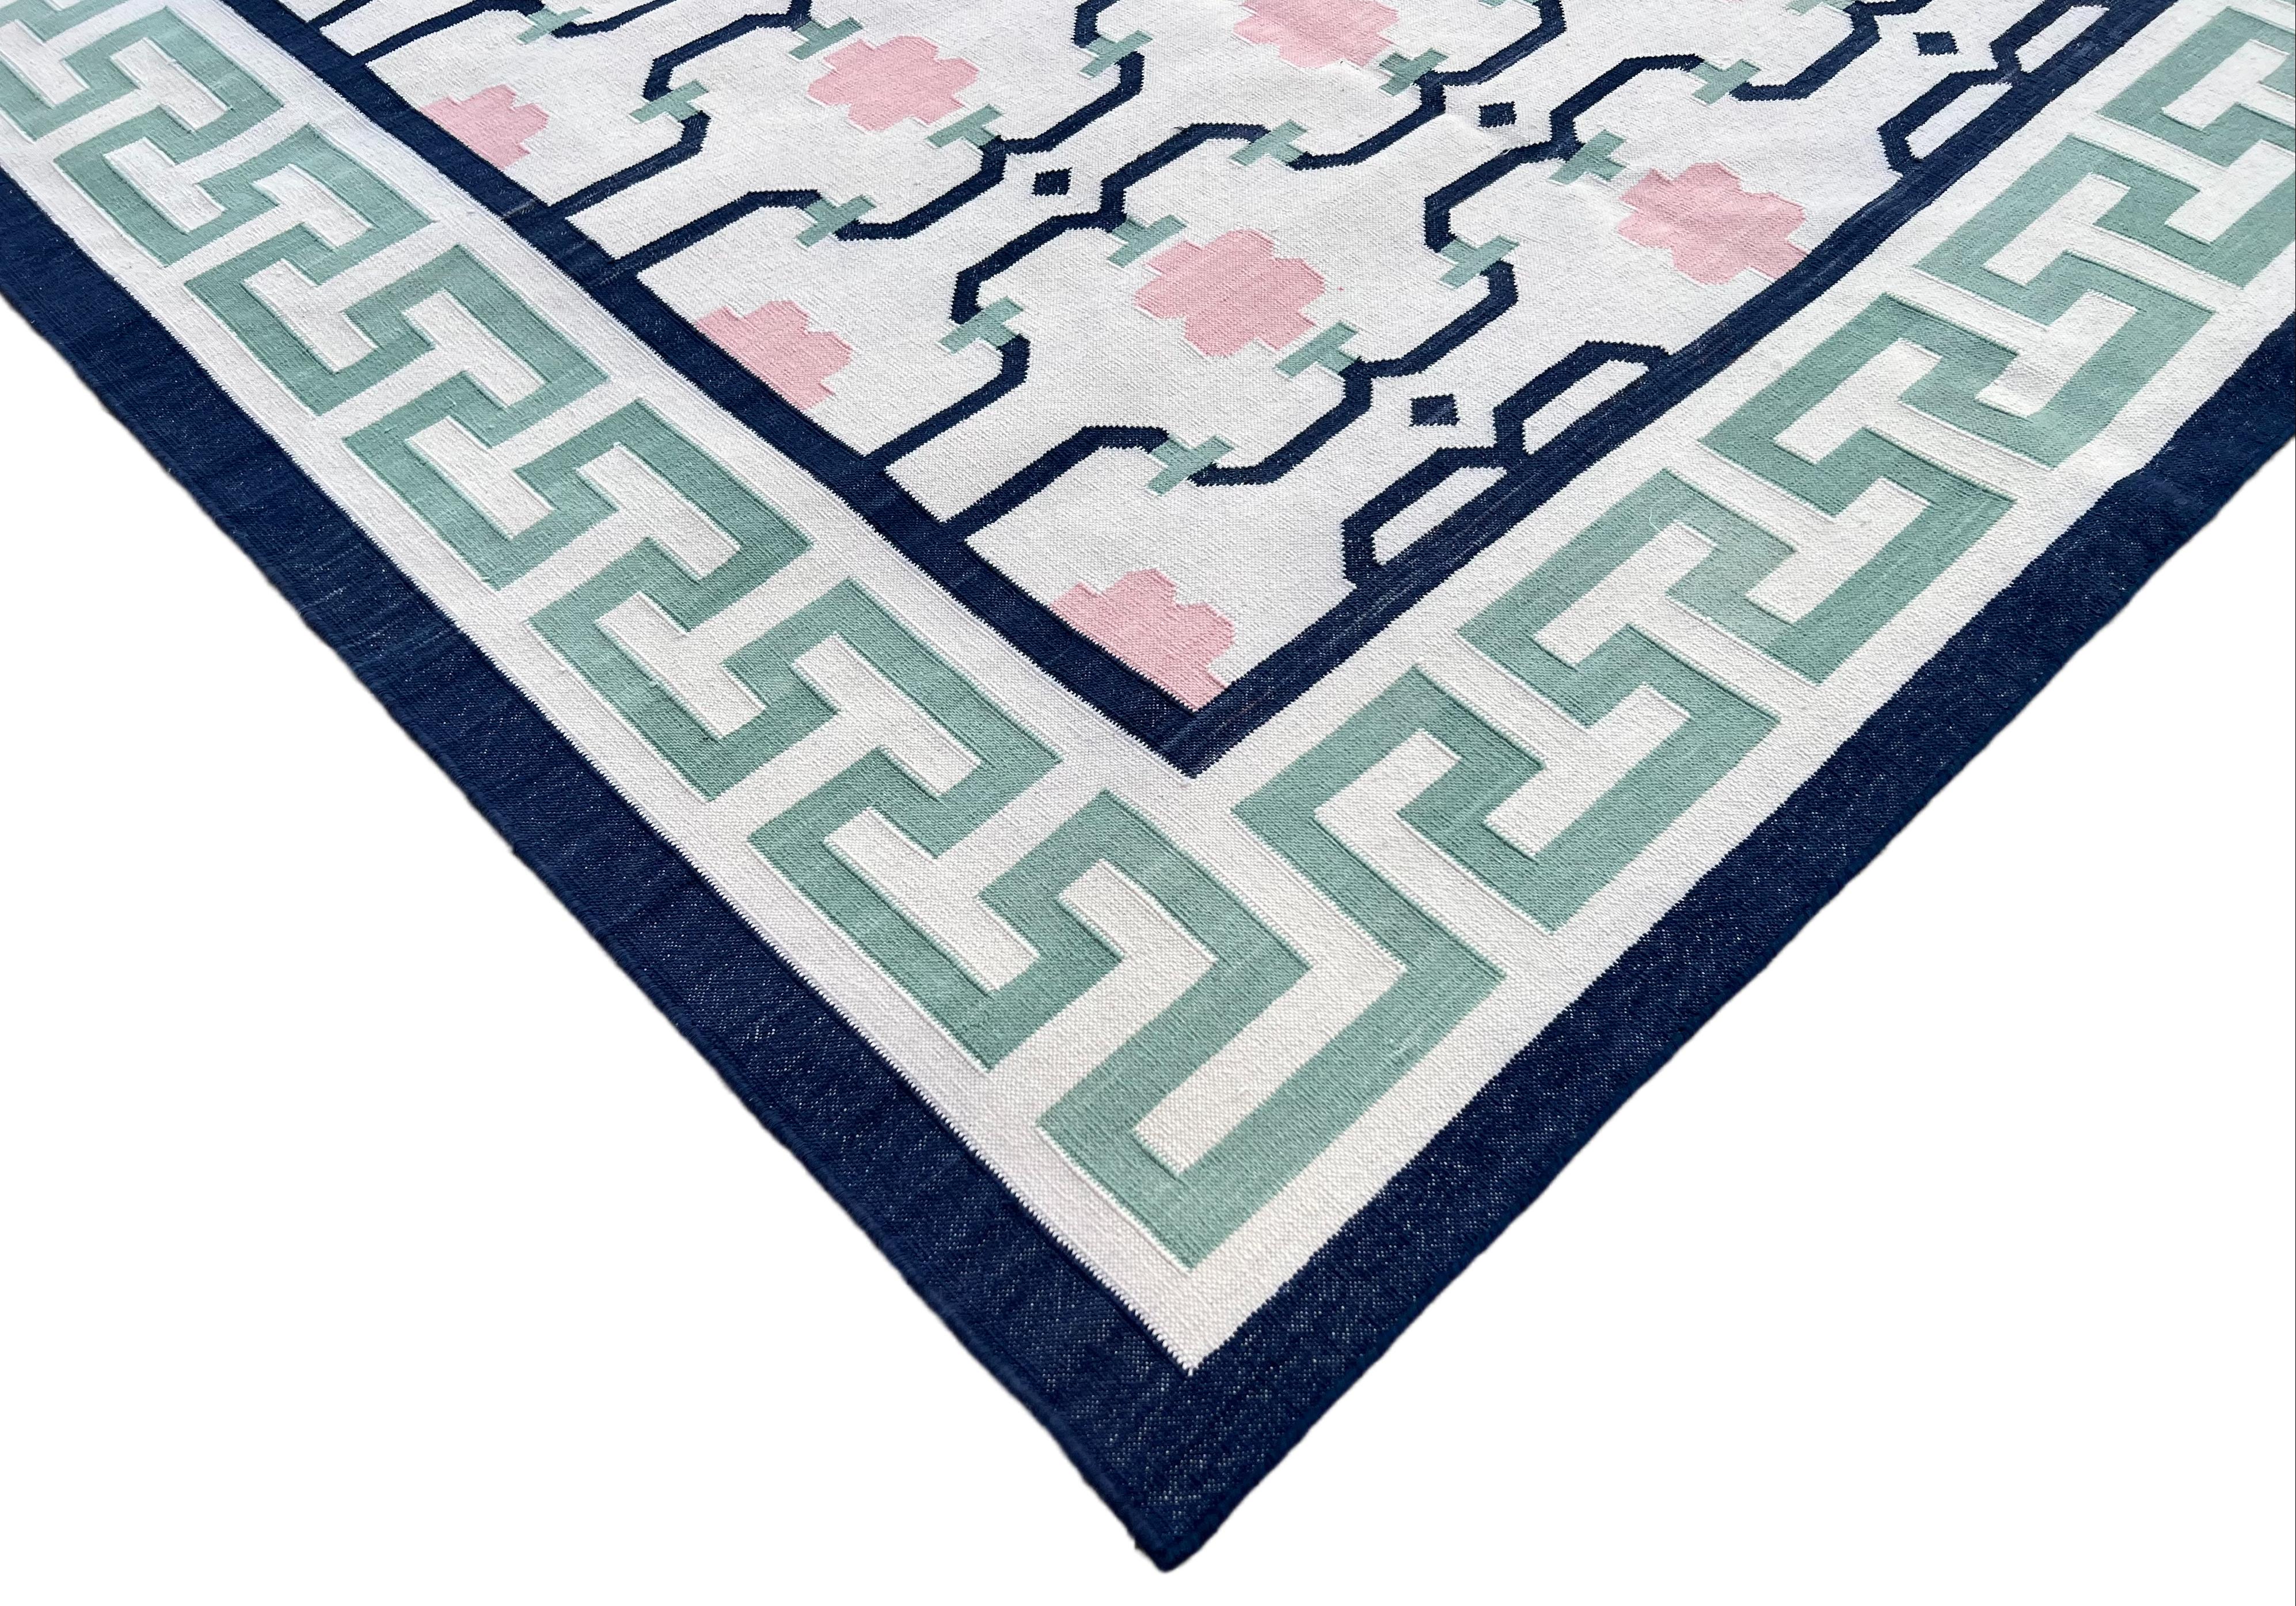 Cotton Natural Vegetable Dyed Cream, Green, Pink & Navy Blue Geometric Indian Rug-9'x12'
These special flat-weave dhurries are hand-woven with 15 ply 100% cotton yarn. Due to the special manufacturing techniques used to create our rugs, the size and